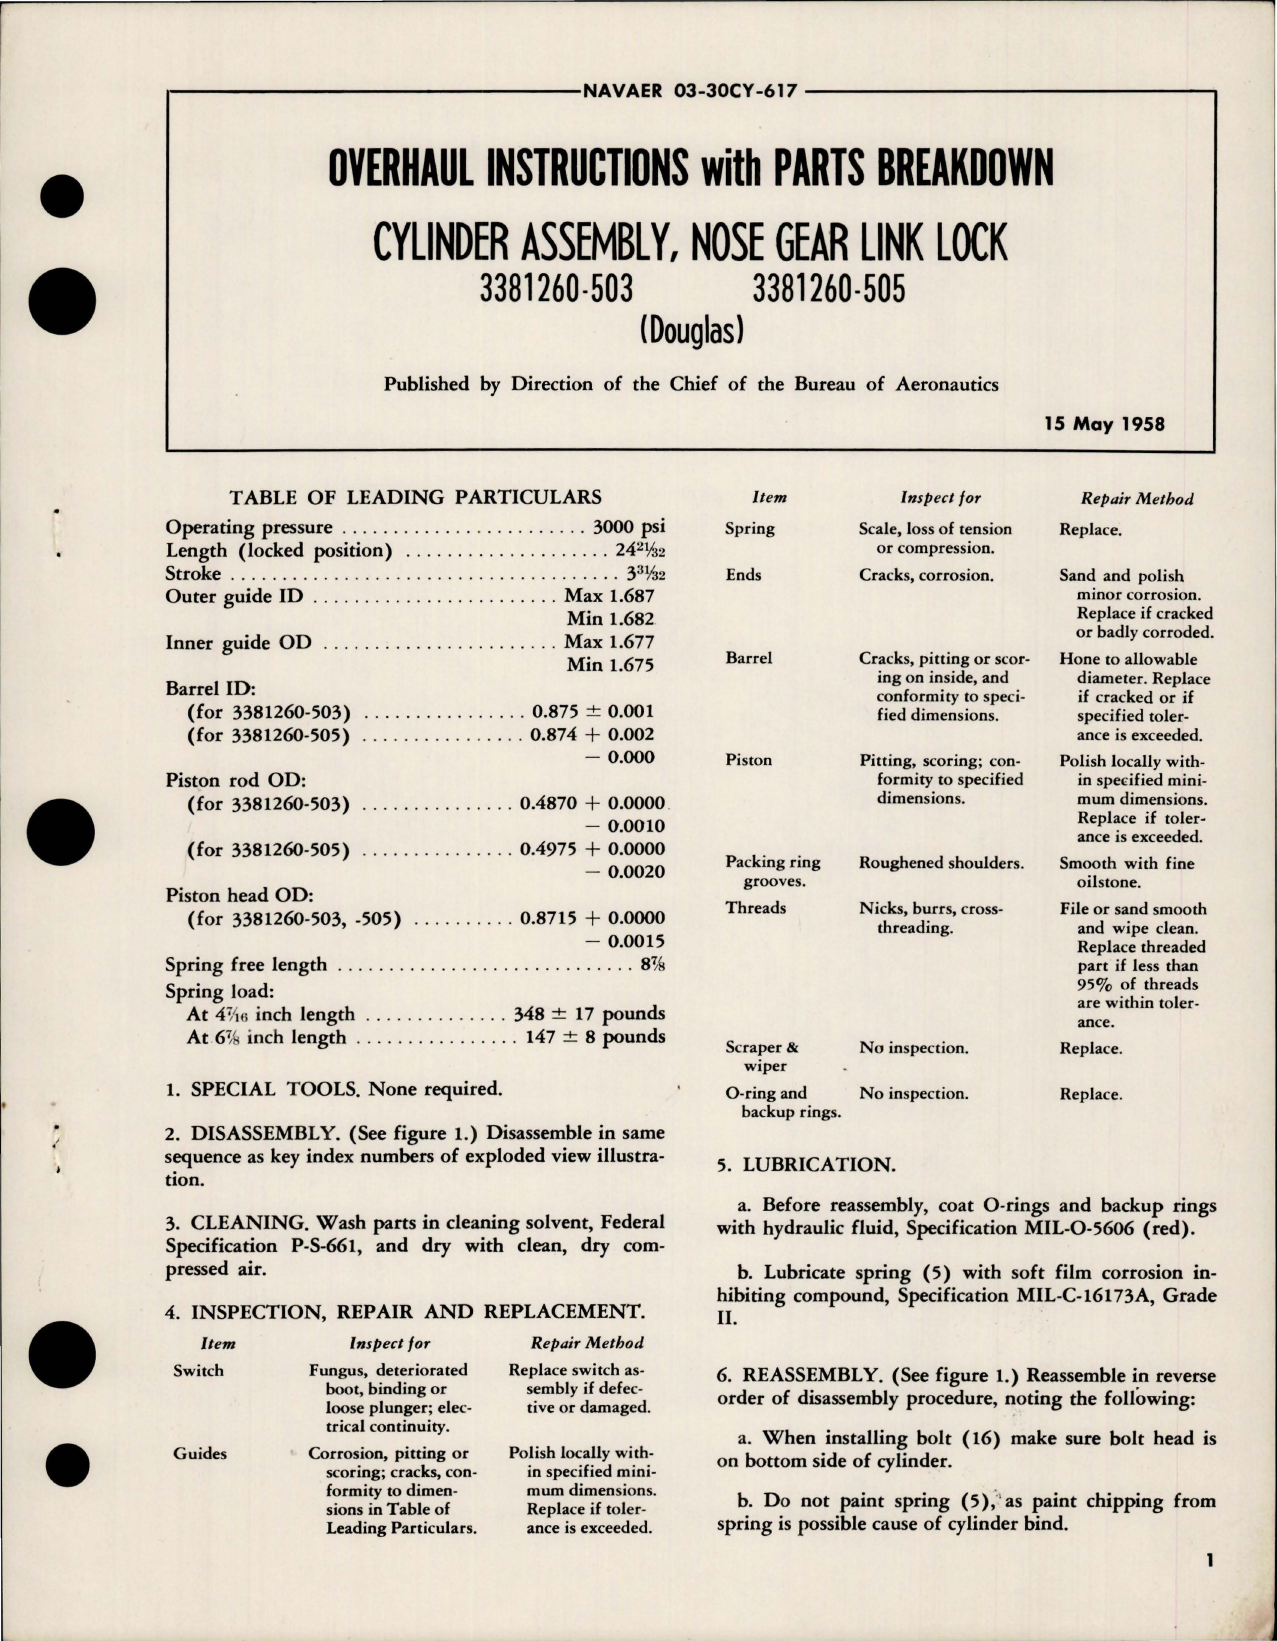 Sample page 1 from AirCorps Library document: Overhaul Instructions with Parts for Nose Gear Link Lock Cylinder Assembly - 3381260-503, 3381260-505